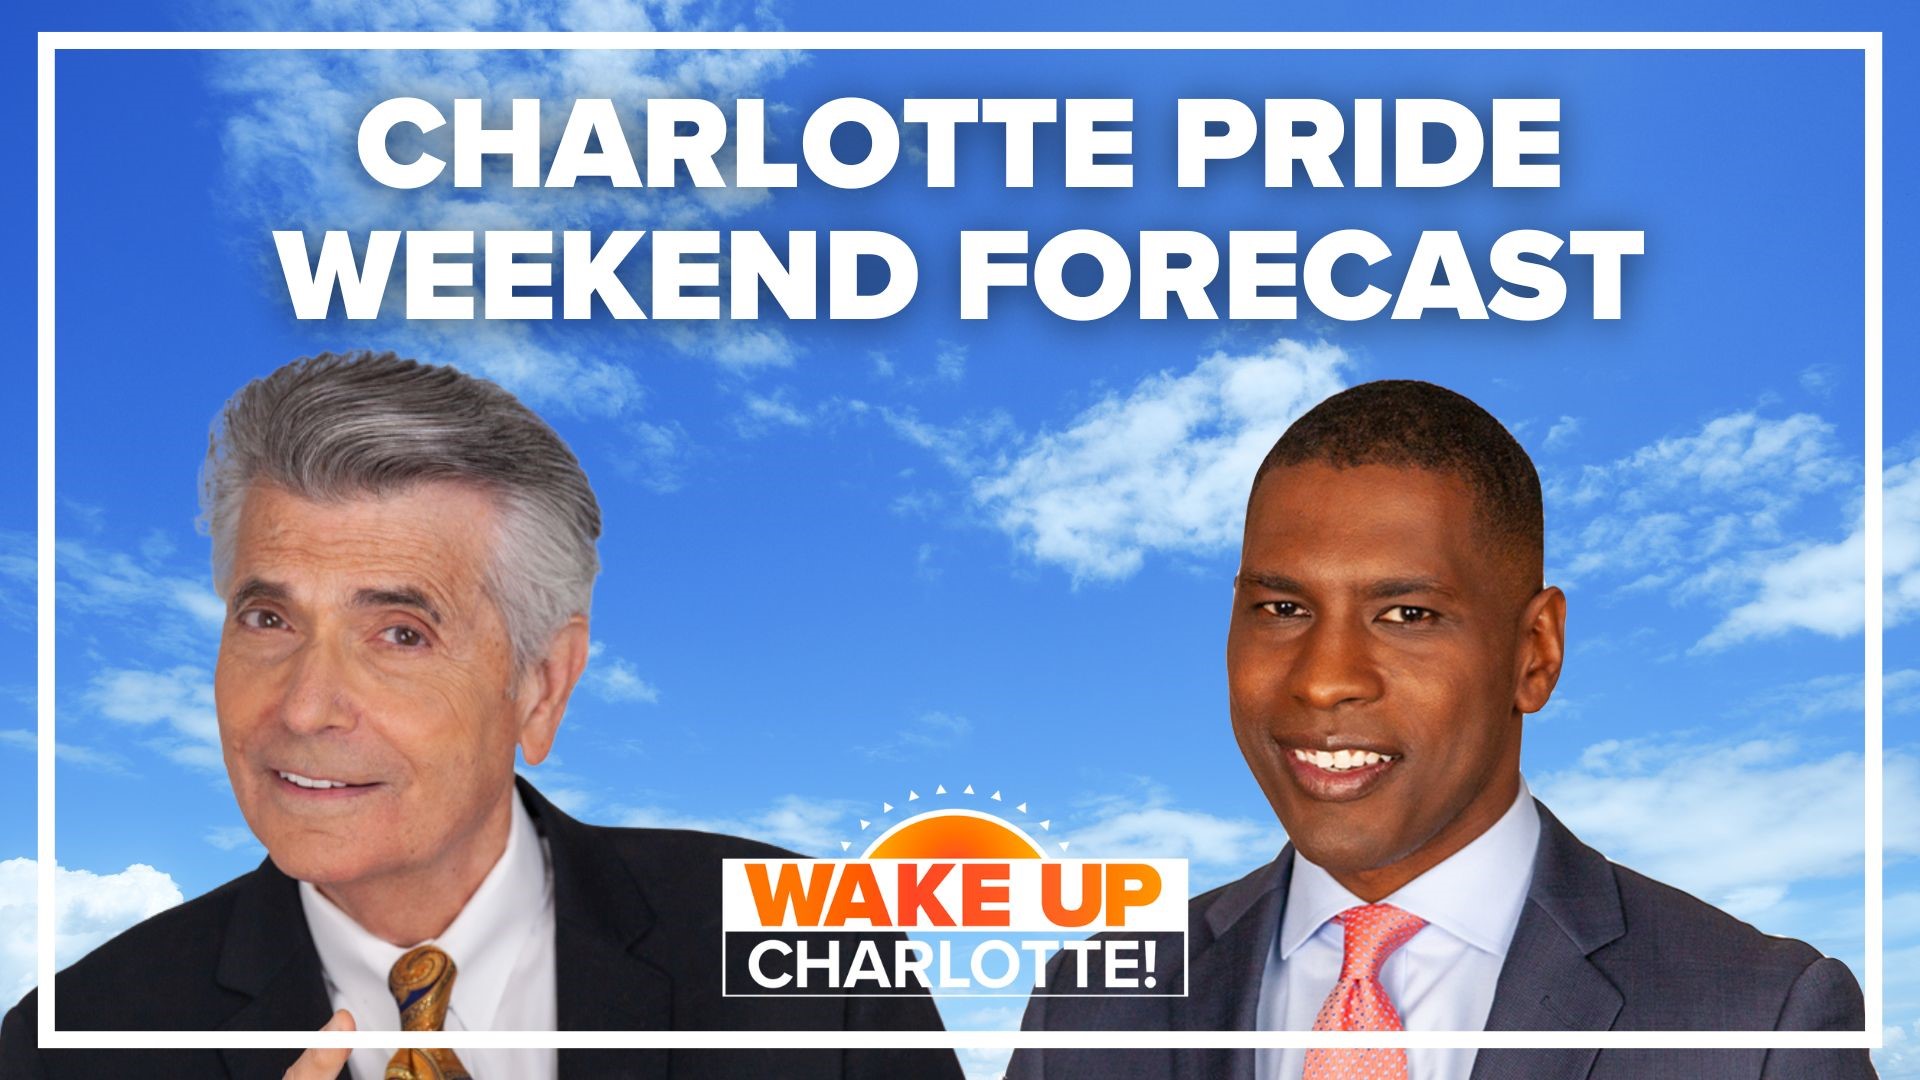 Charlotte will see the chance of showers and storms all weekend as thousands of people visit for Pride weekend. Larry Sprinkle & KJ Jacobs have the full forecast.